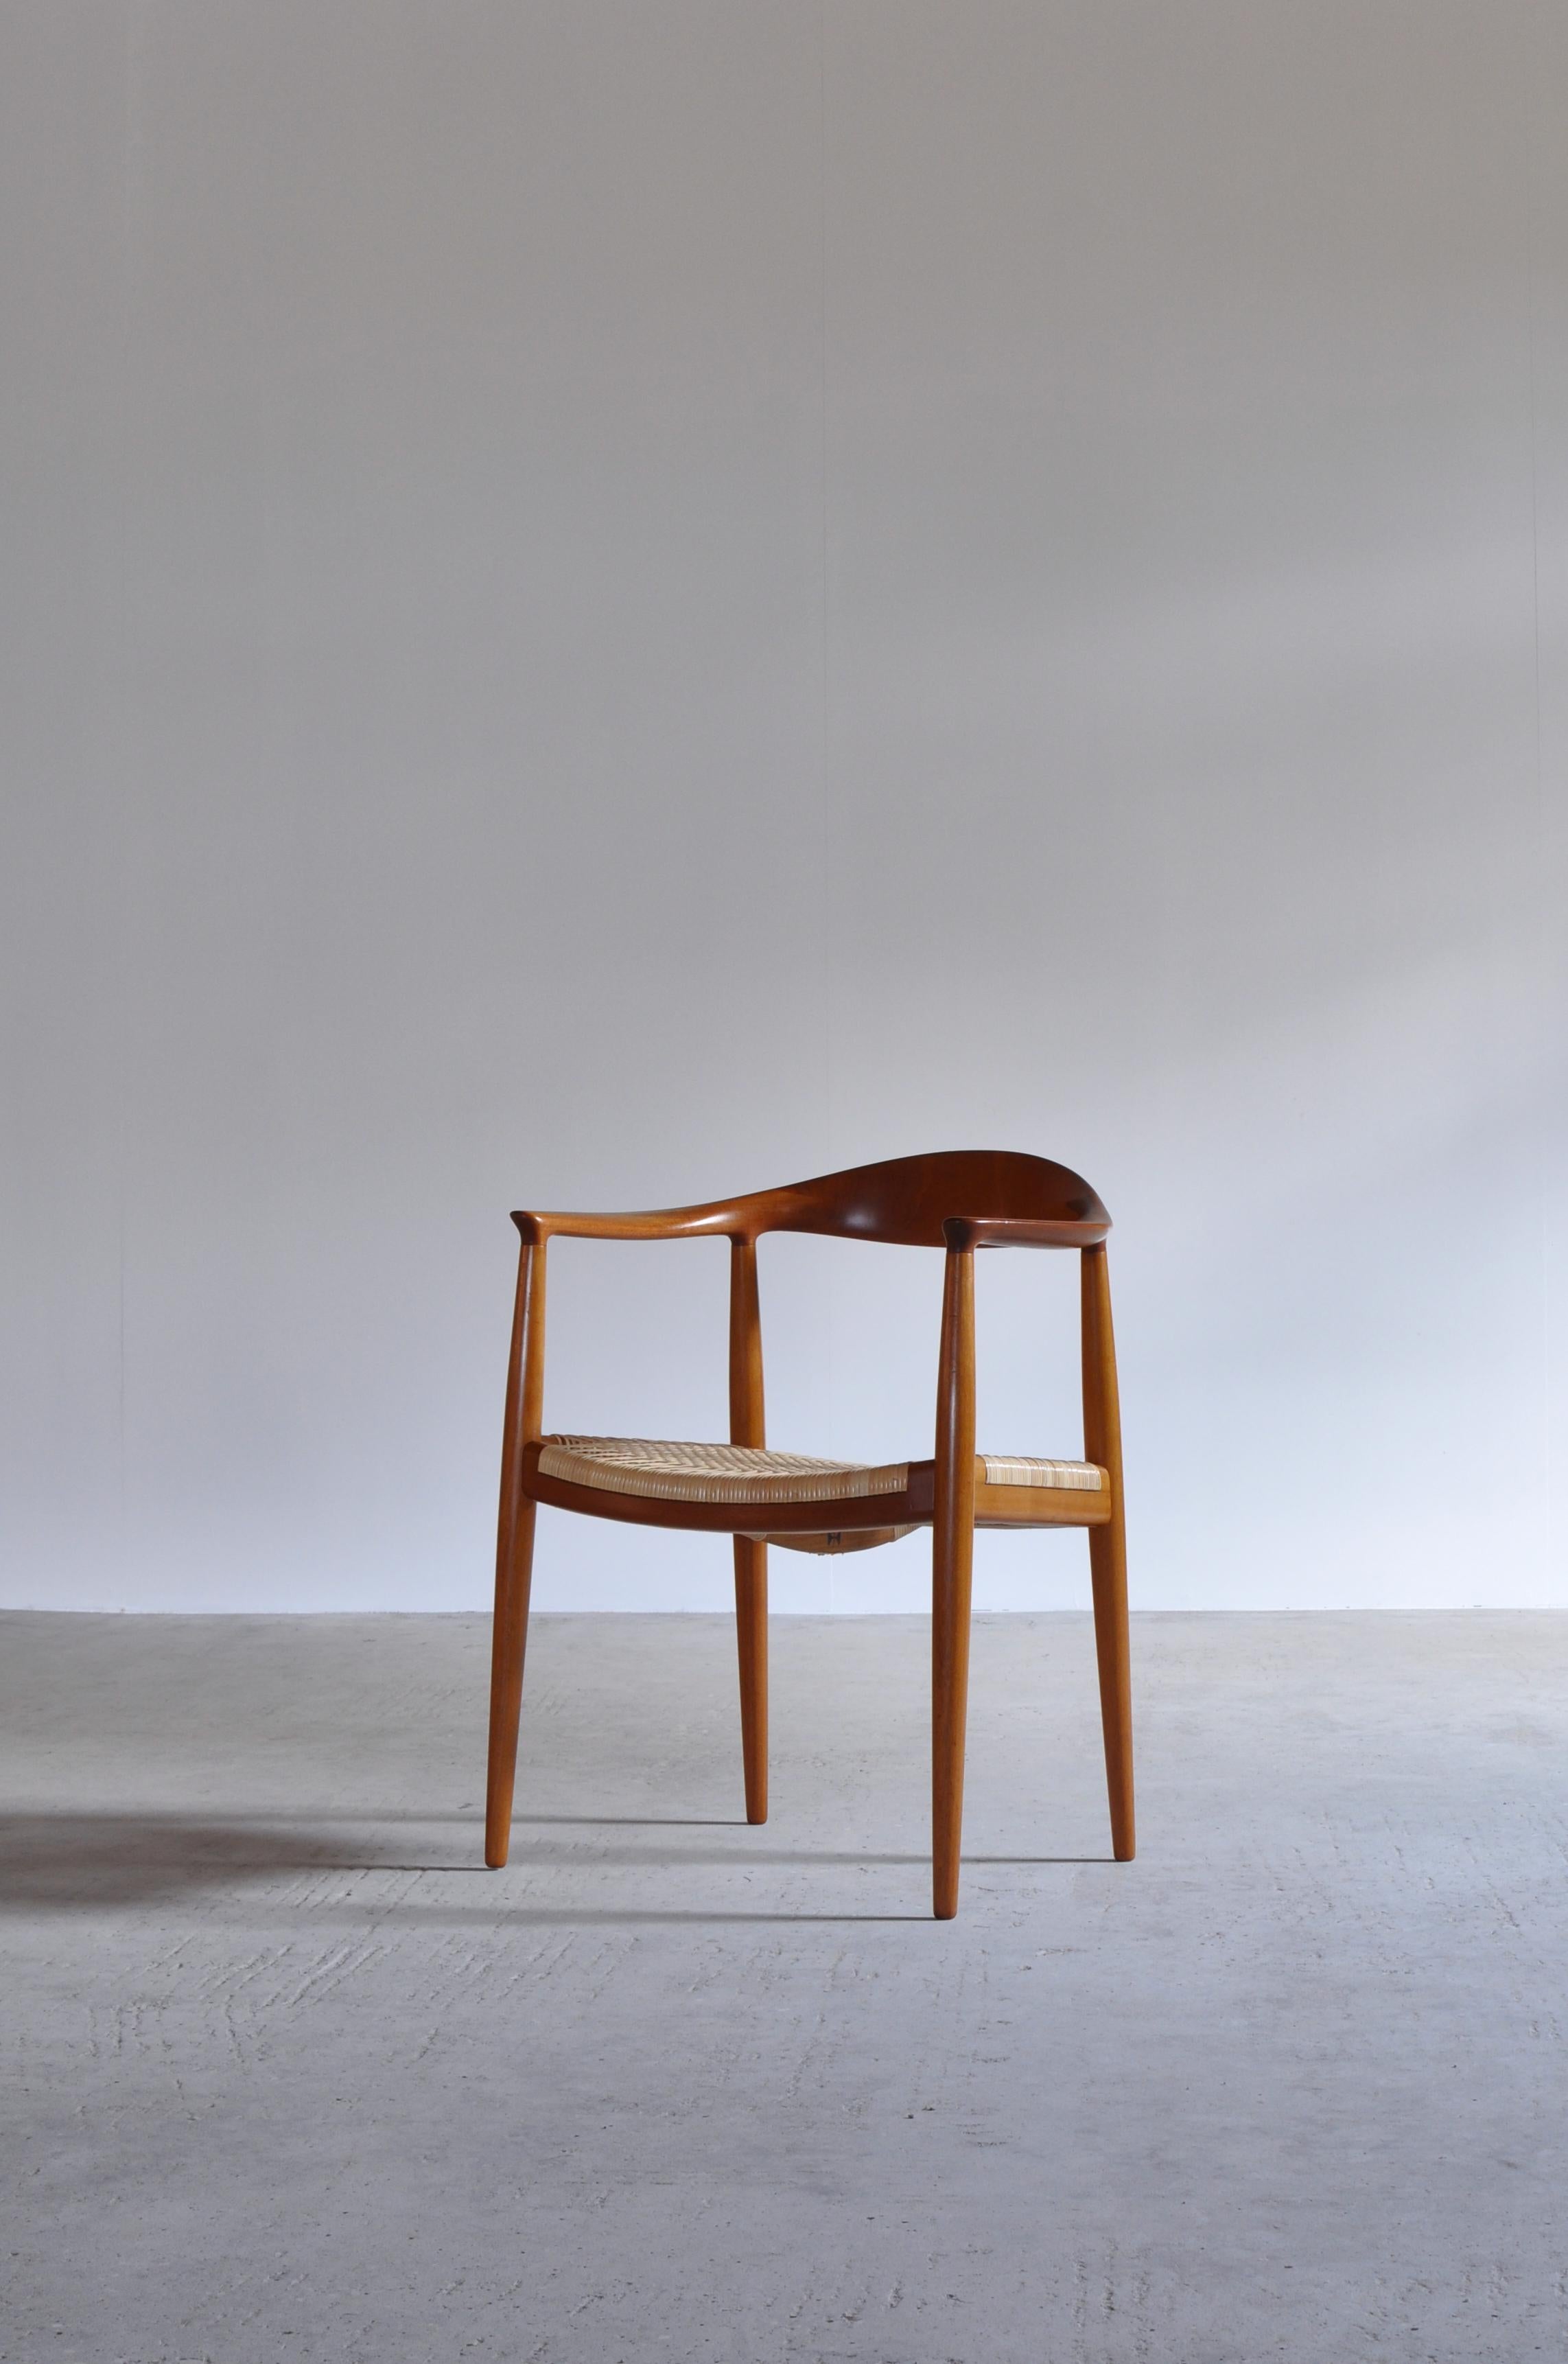 Designed by Hans J. Wegner in 1949 this is one of the most iconic pieces of Danish modern furniture design. Rare and early model 